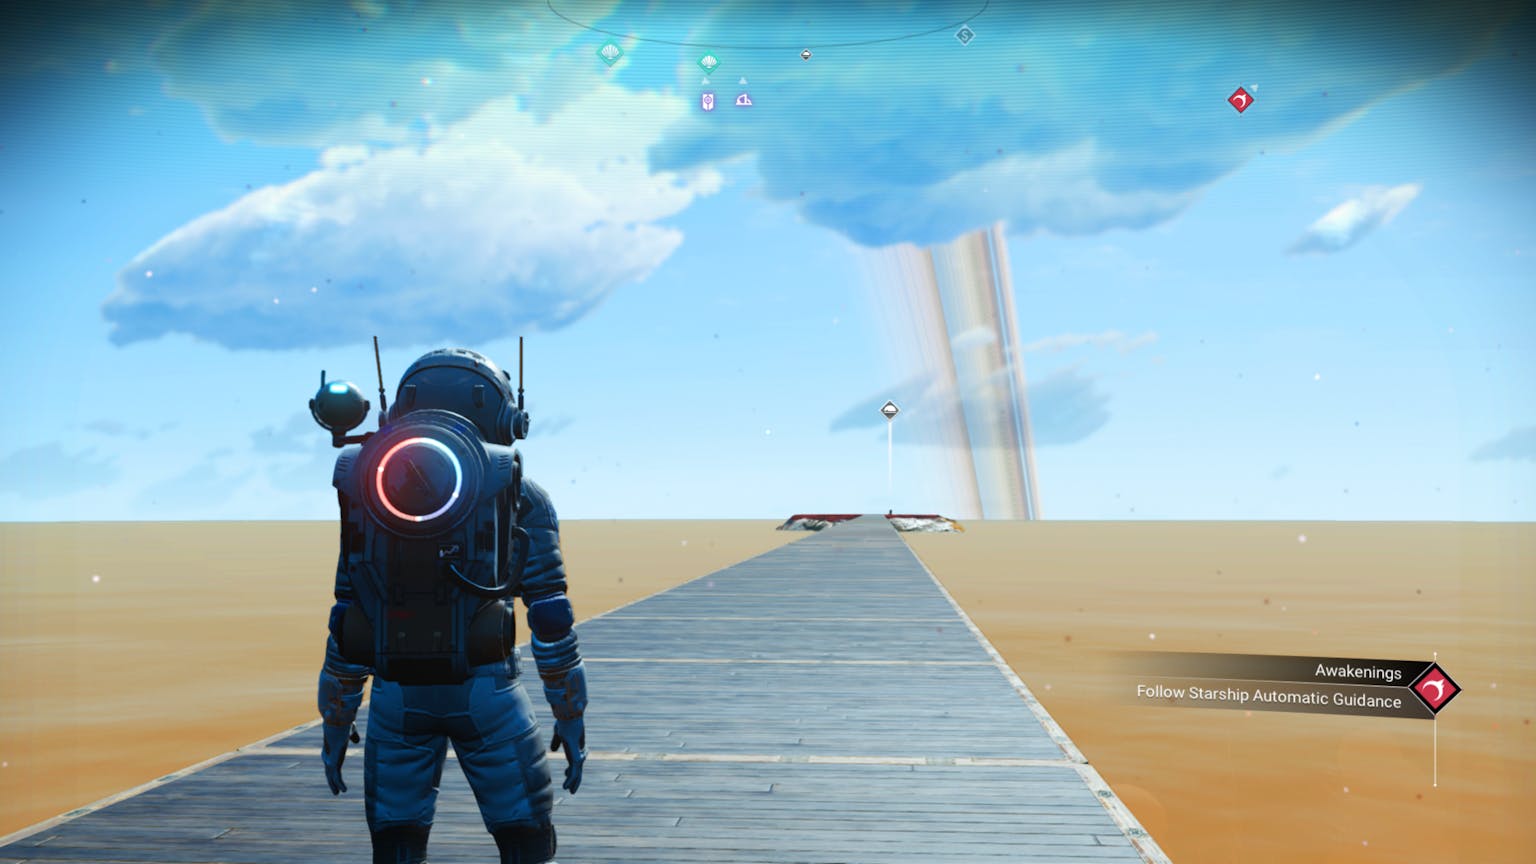 A No Man's Sky astronaut gazes across a bridge over water on a partly cloudy day. He stares beyond the horizon at the planet's rings and ponders his existence. Who is he? Why is he? What does he have to do to tame a sky worm? Important questions, indeed.